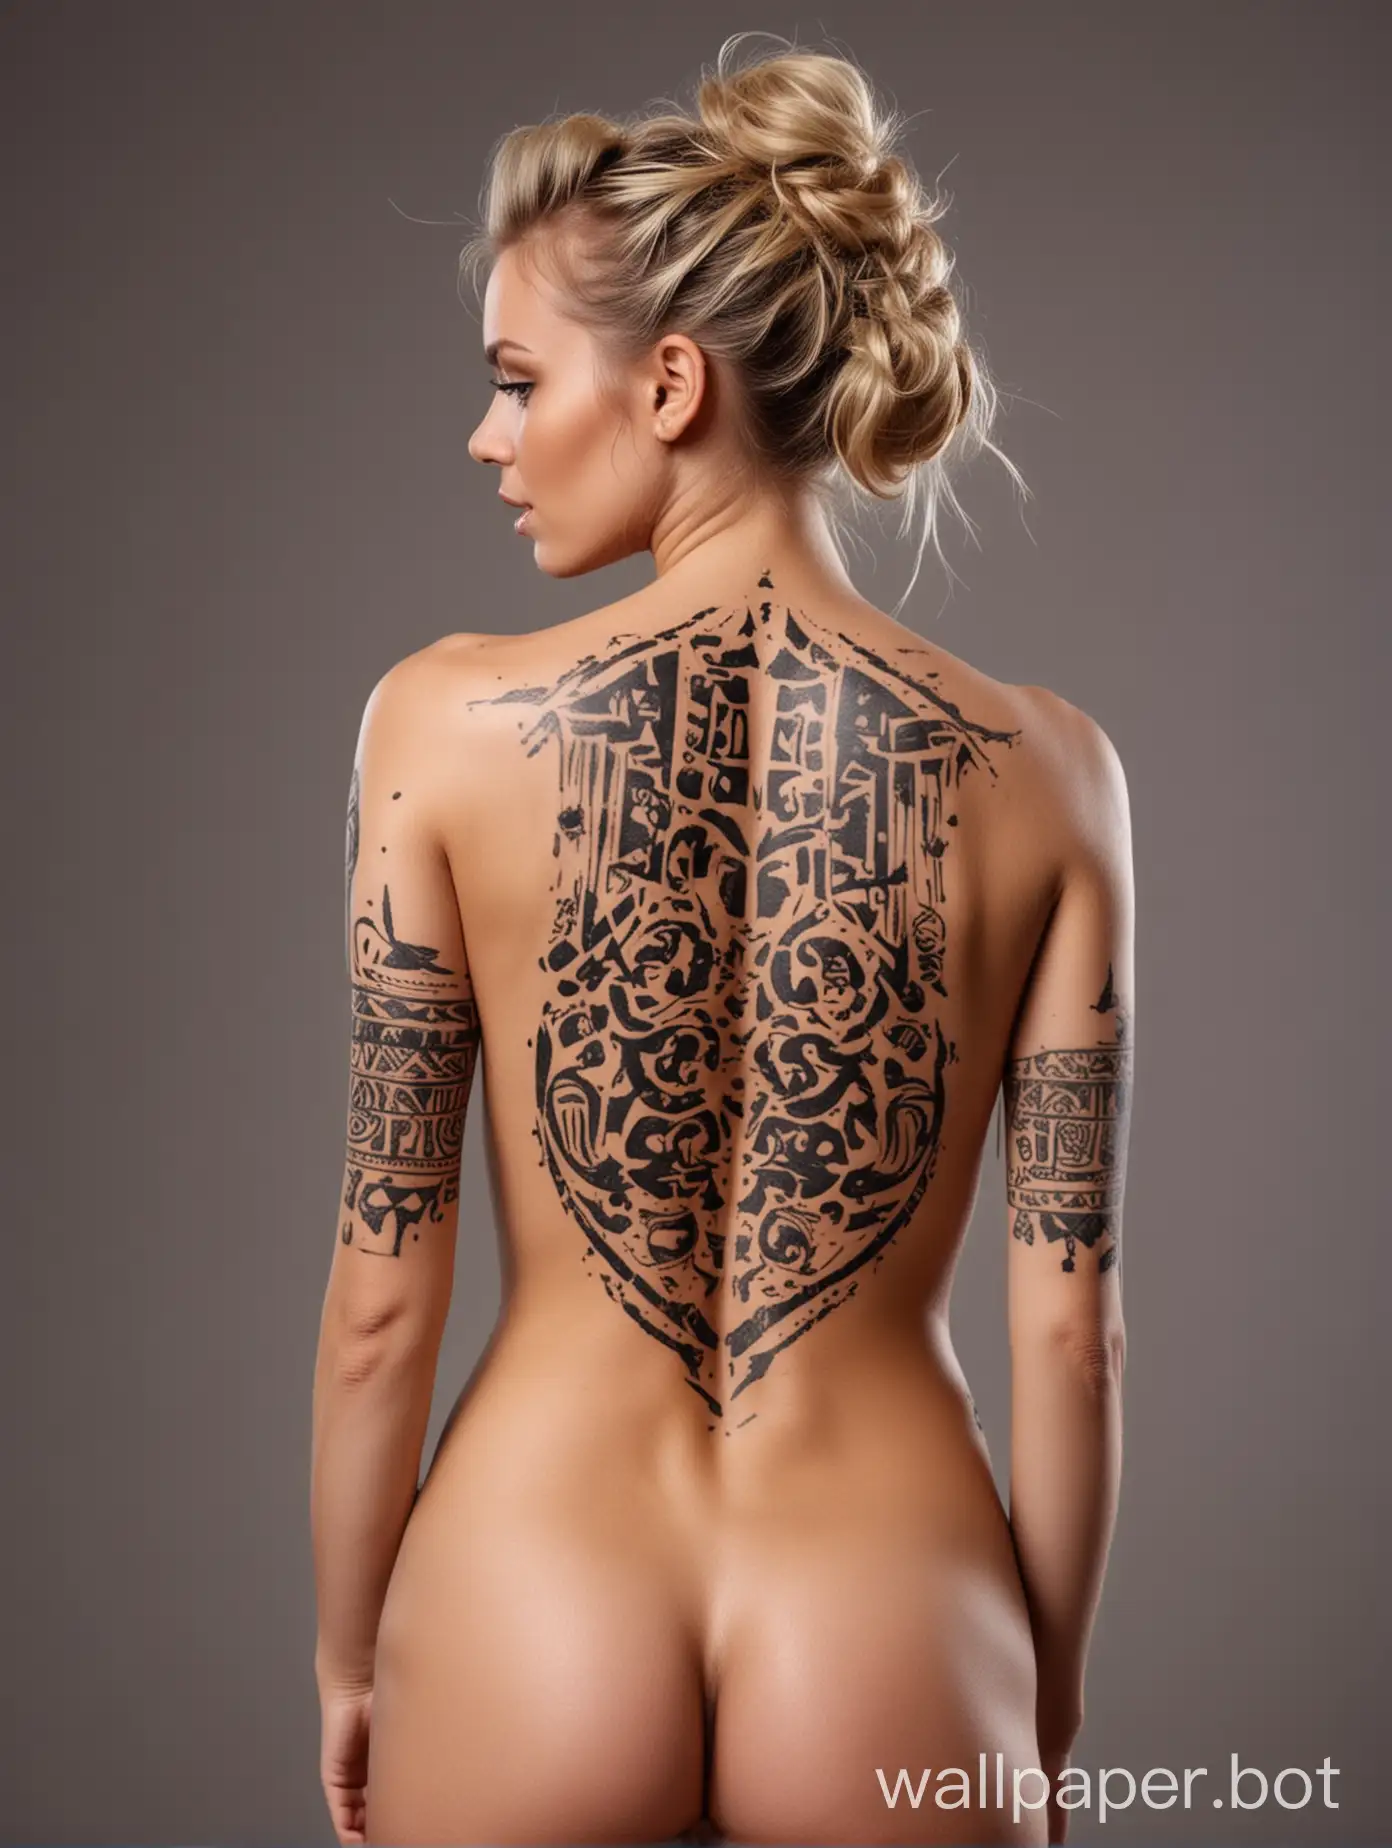 Mesmerizing-Portrait-of-a-Blonde-Woman-with-Tribal-Tattoos